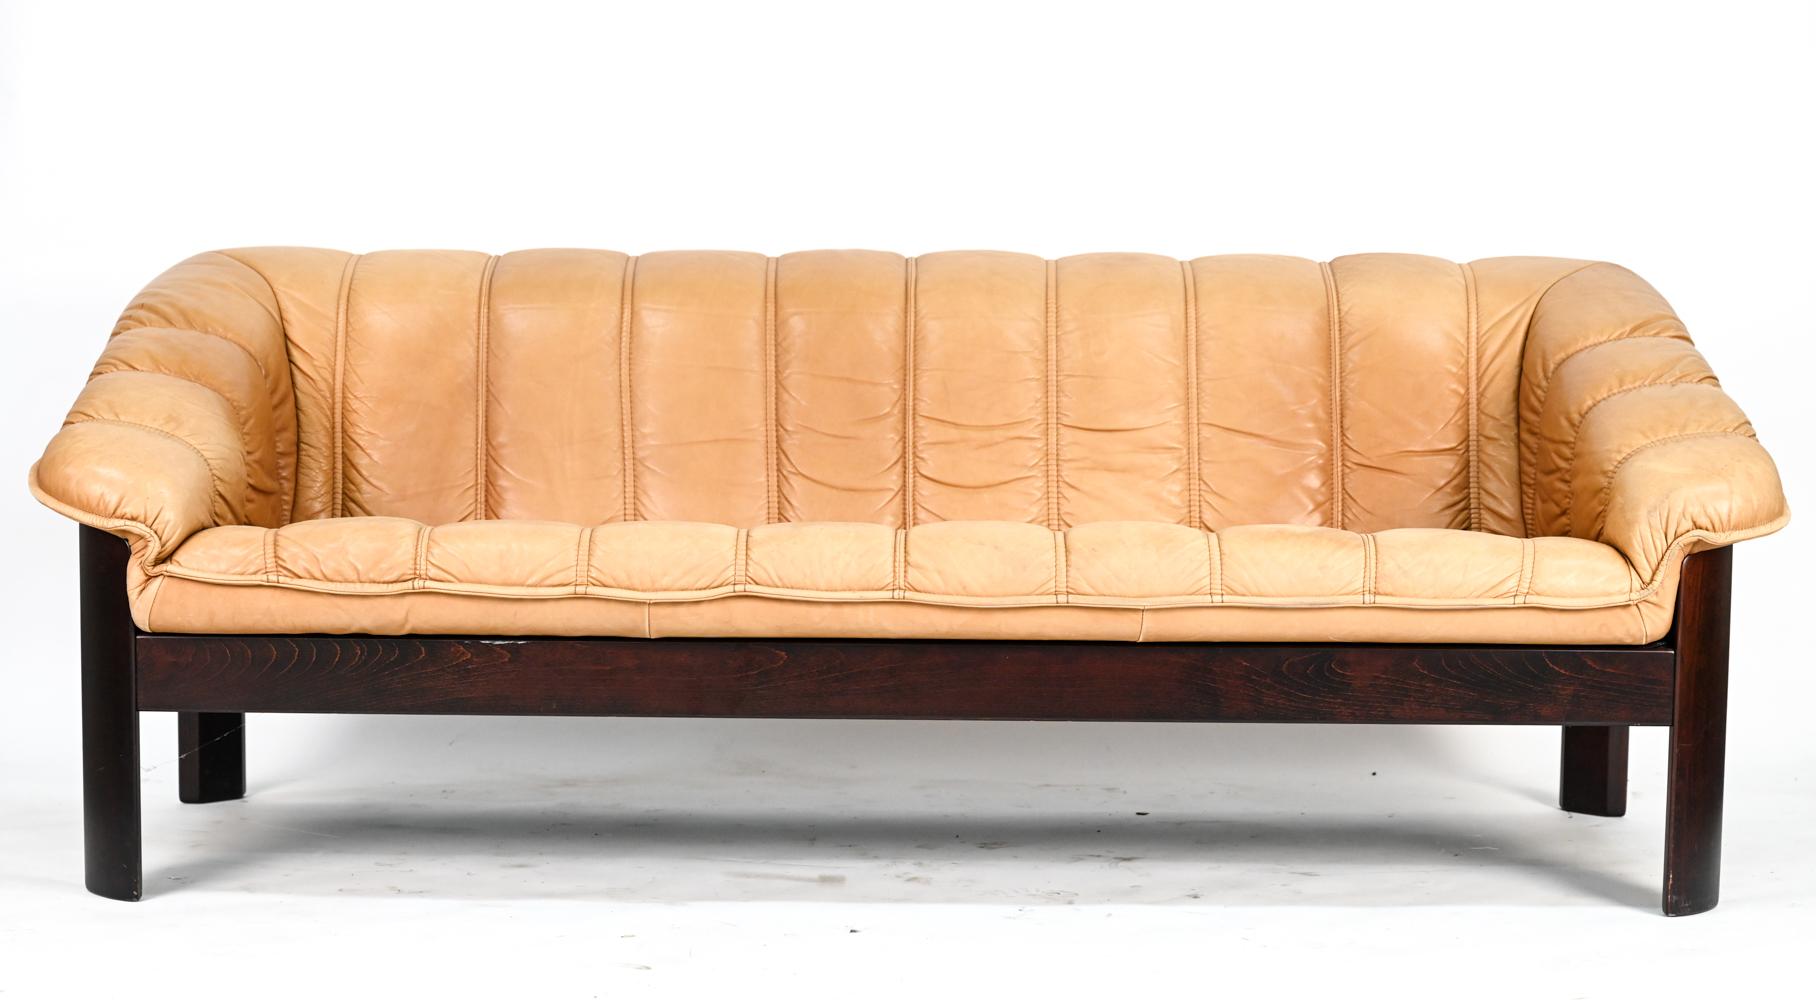 A superb Norwegian sofa suite comprising of a sofa and loveseat by Ekorness, upholstered in handsomely patinated, stitched brandy leather.